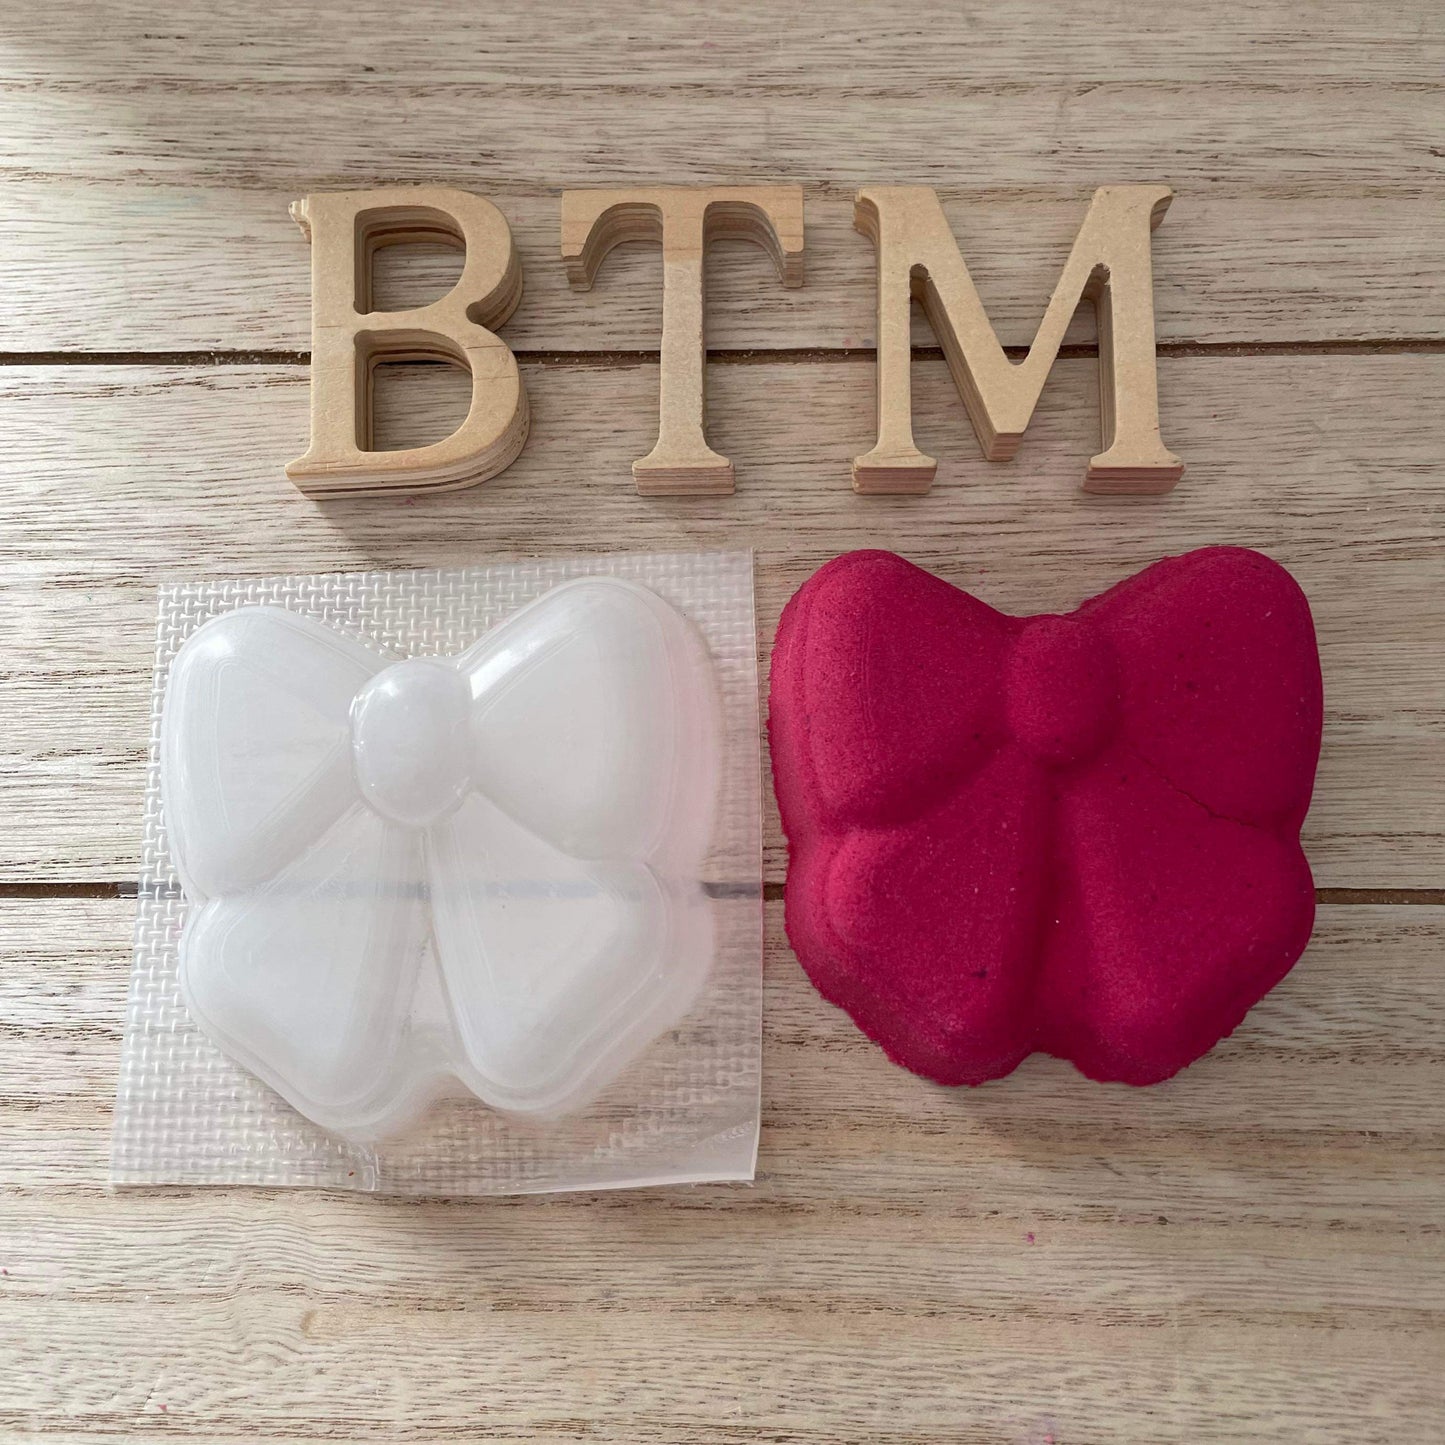 Gift Bow Mold Series